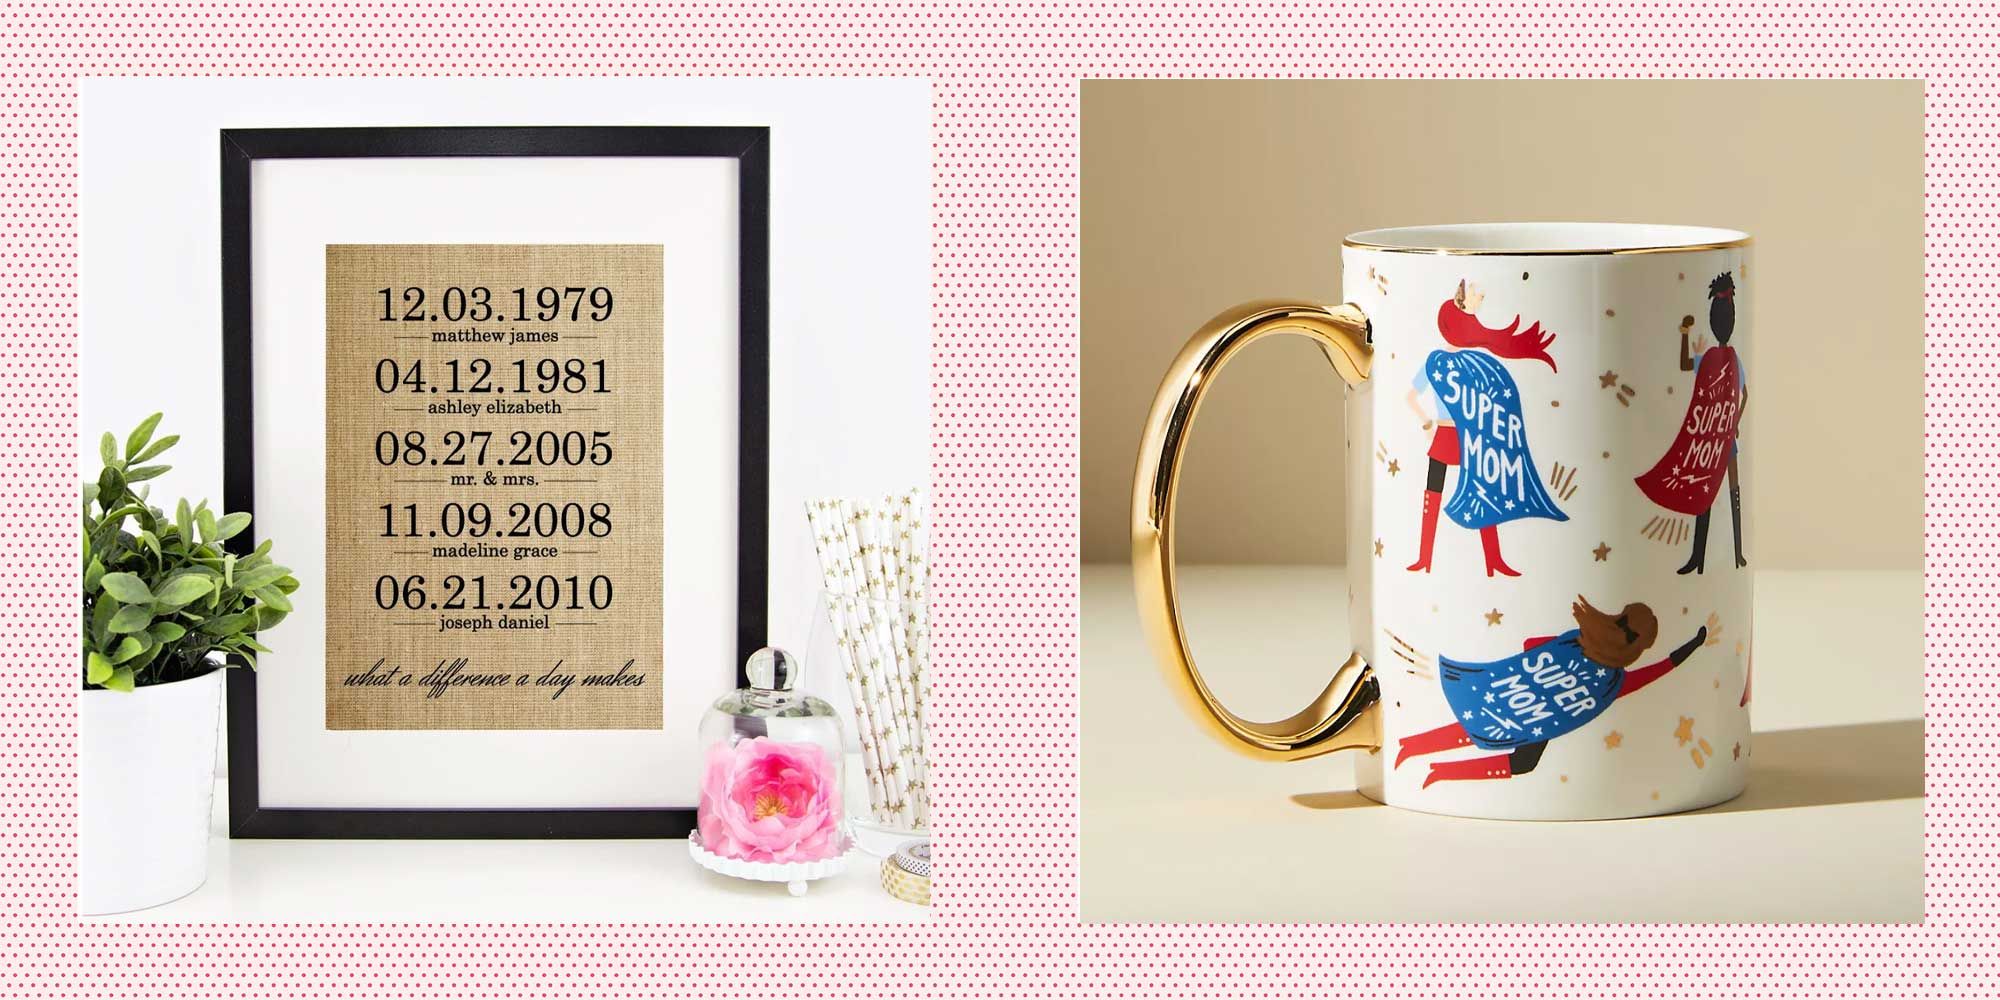 25 Mother's Day Gift Ideas For The Mom Or Mother-Figure In Your Life